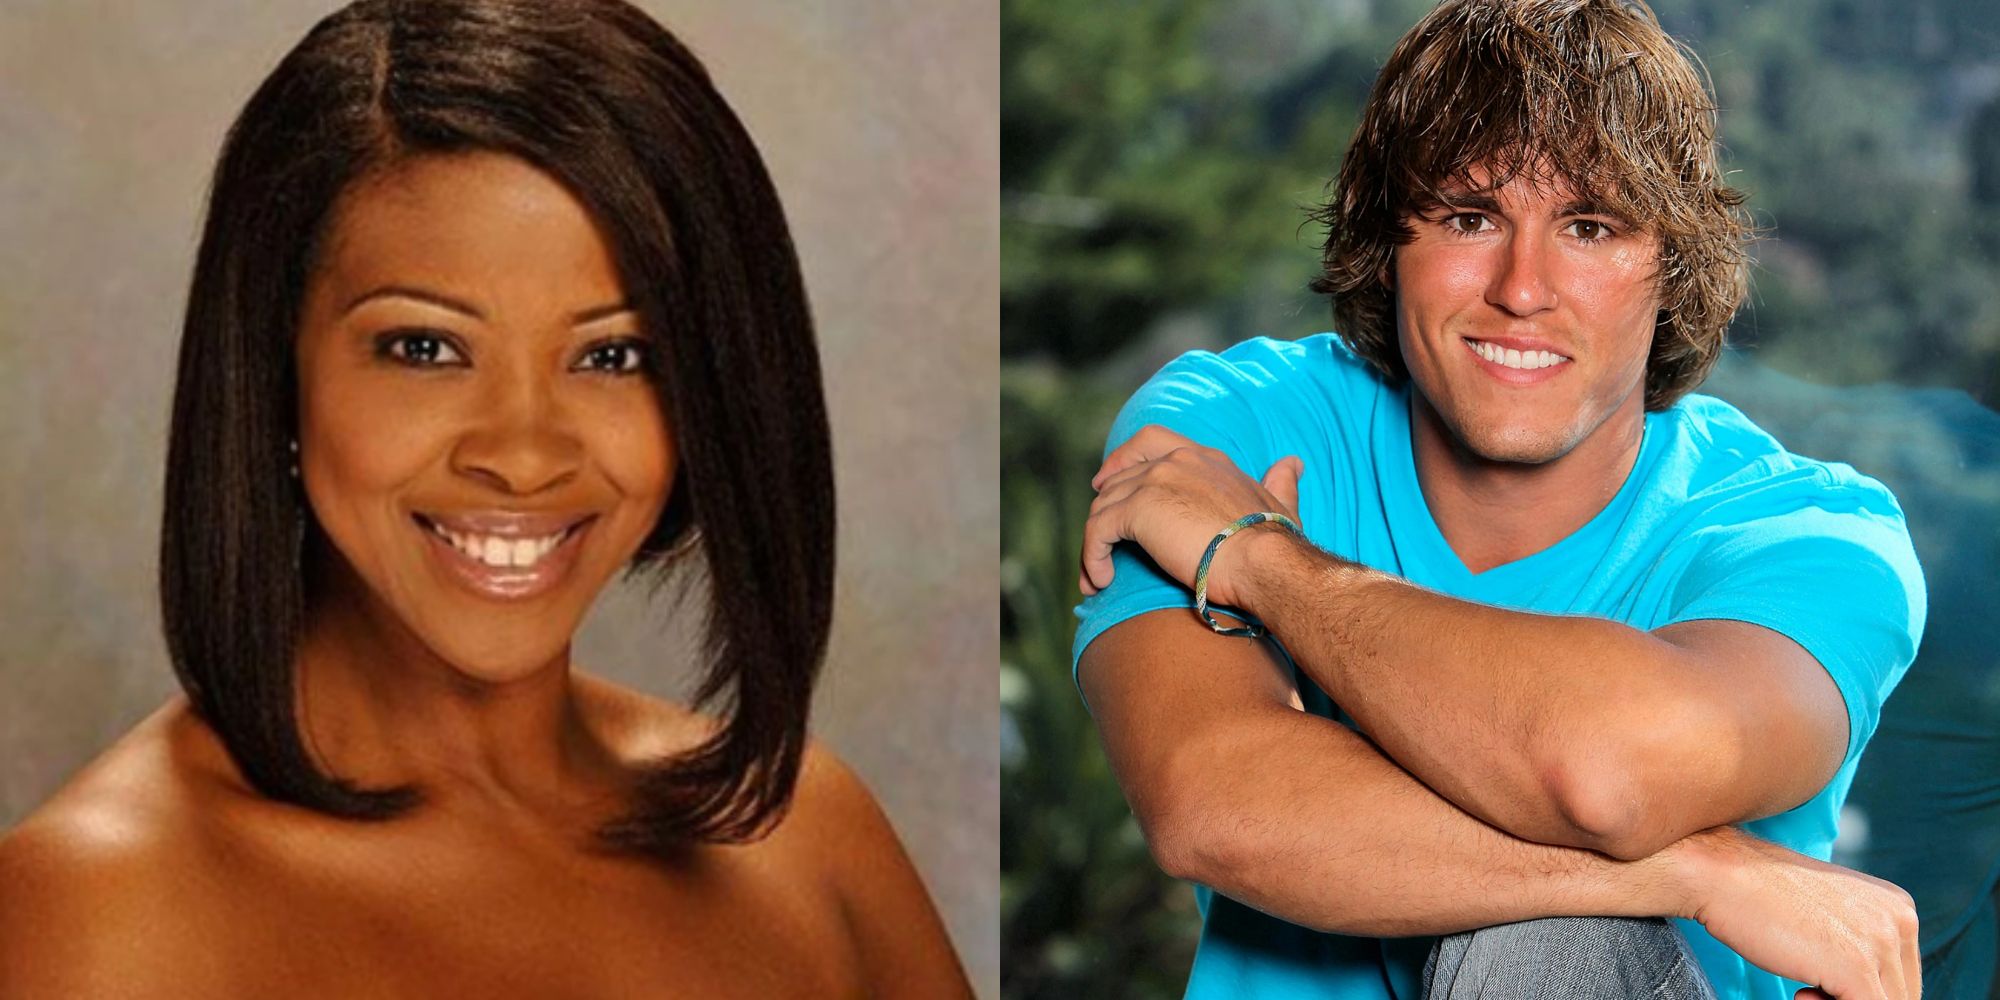 Split image showing Libra Thompson and Hayden Moss in Big Brother.